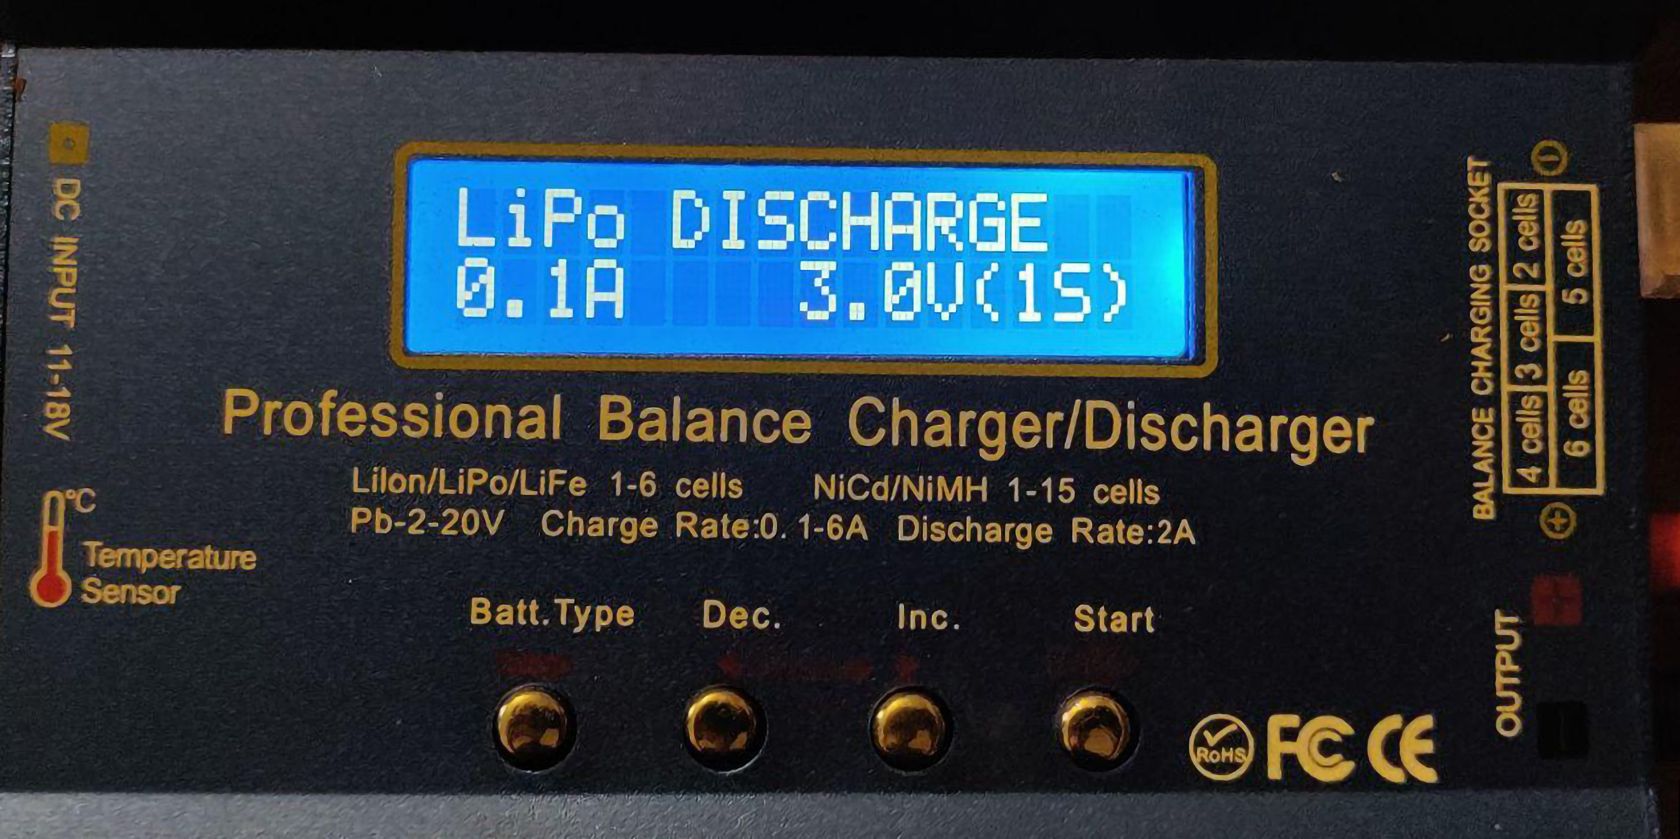 The LiPo discharge setting